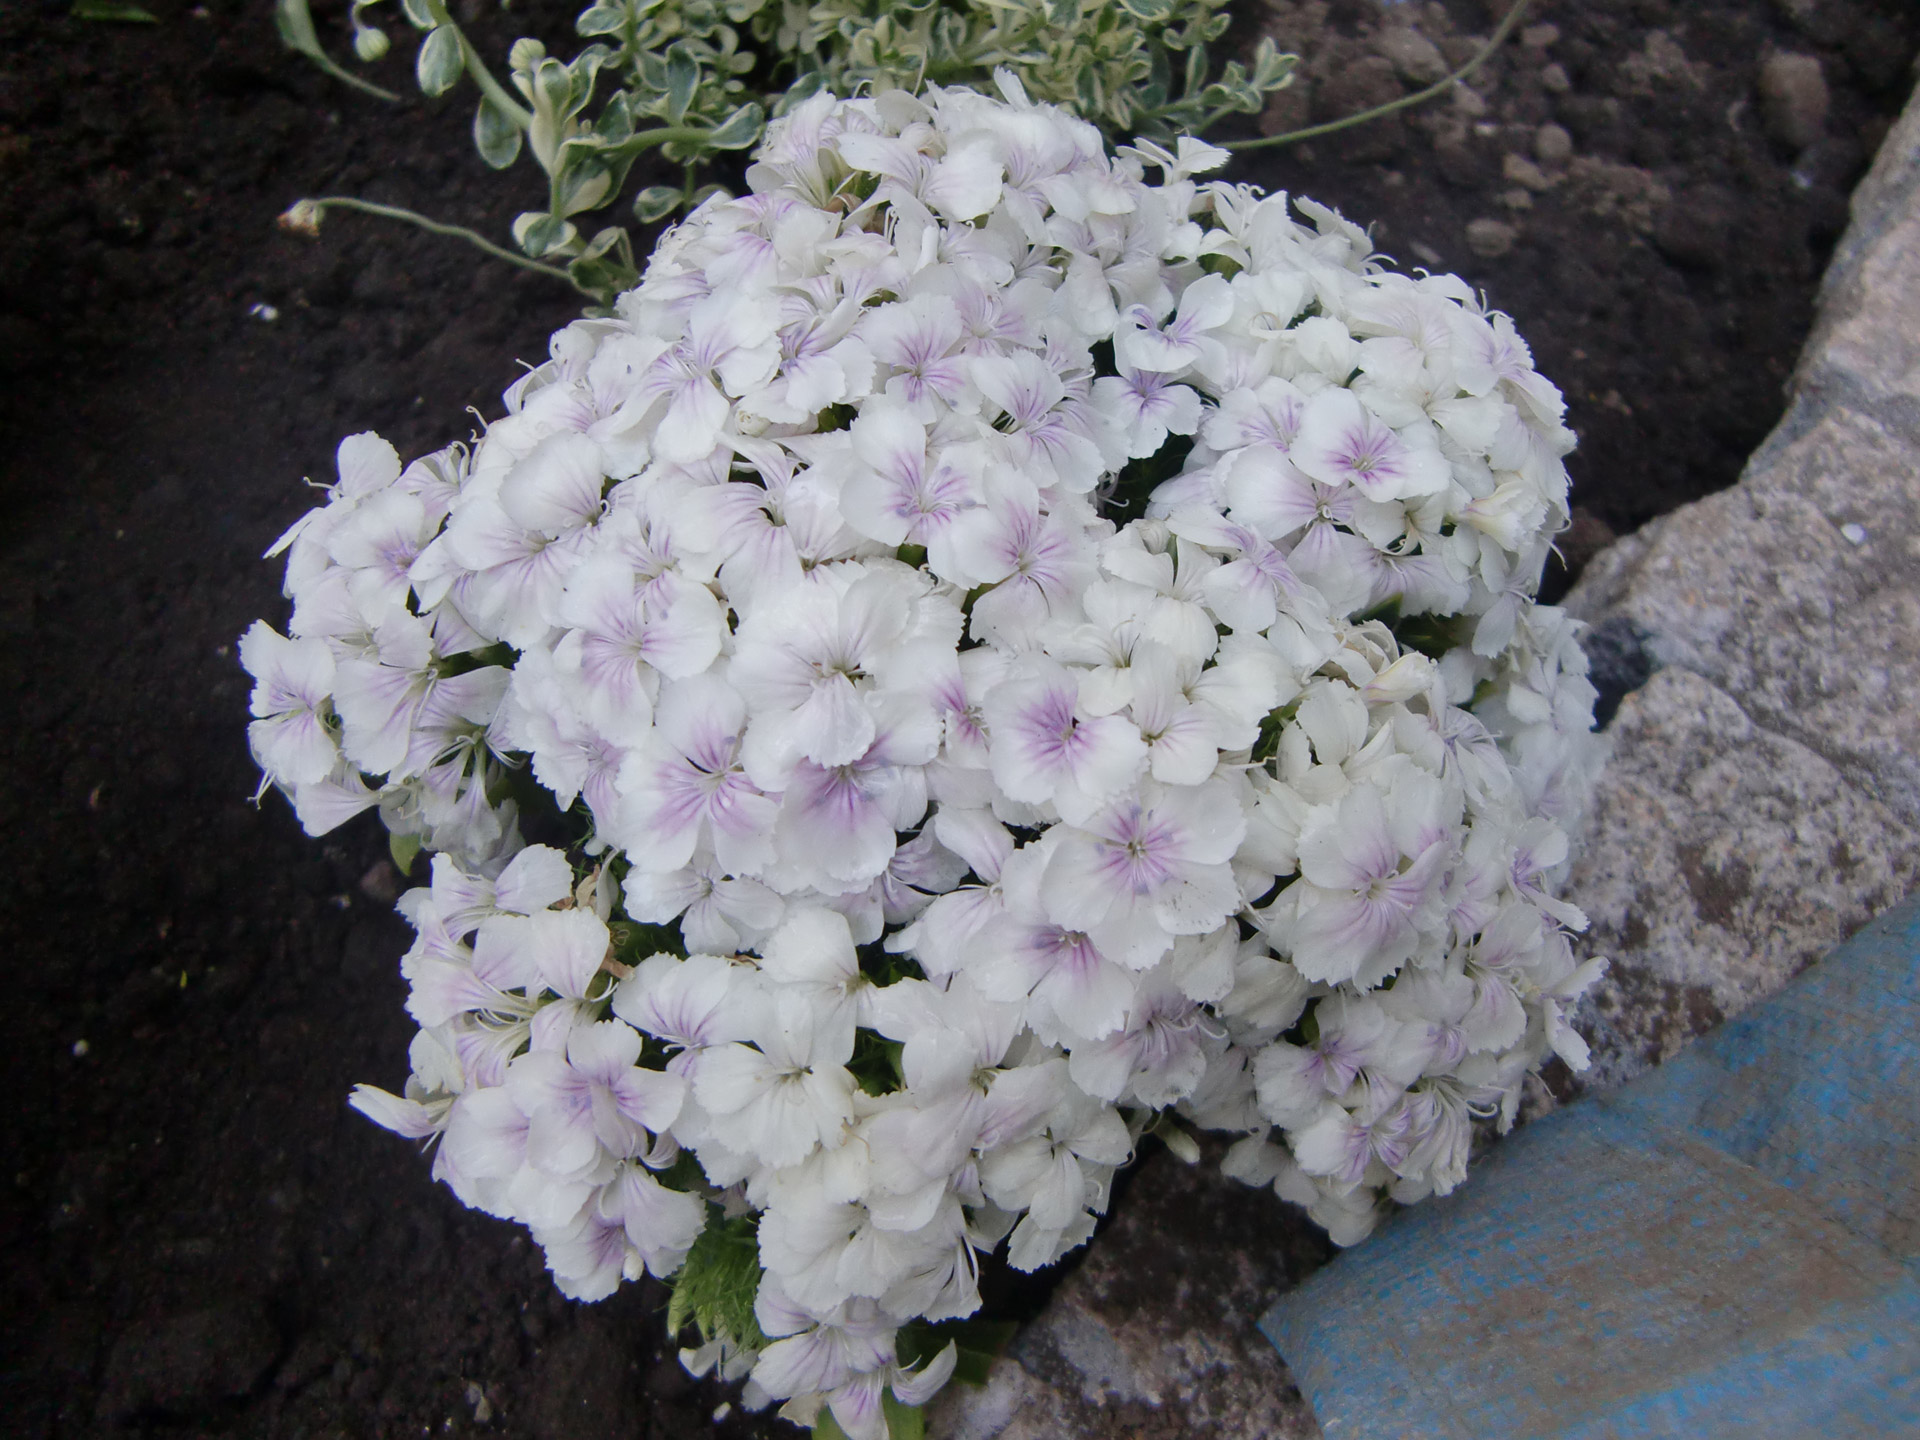 Some white flowers (Dianthus?).